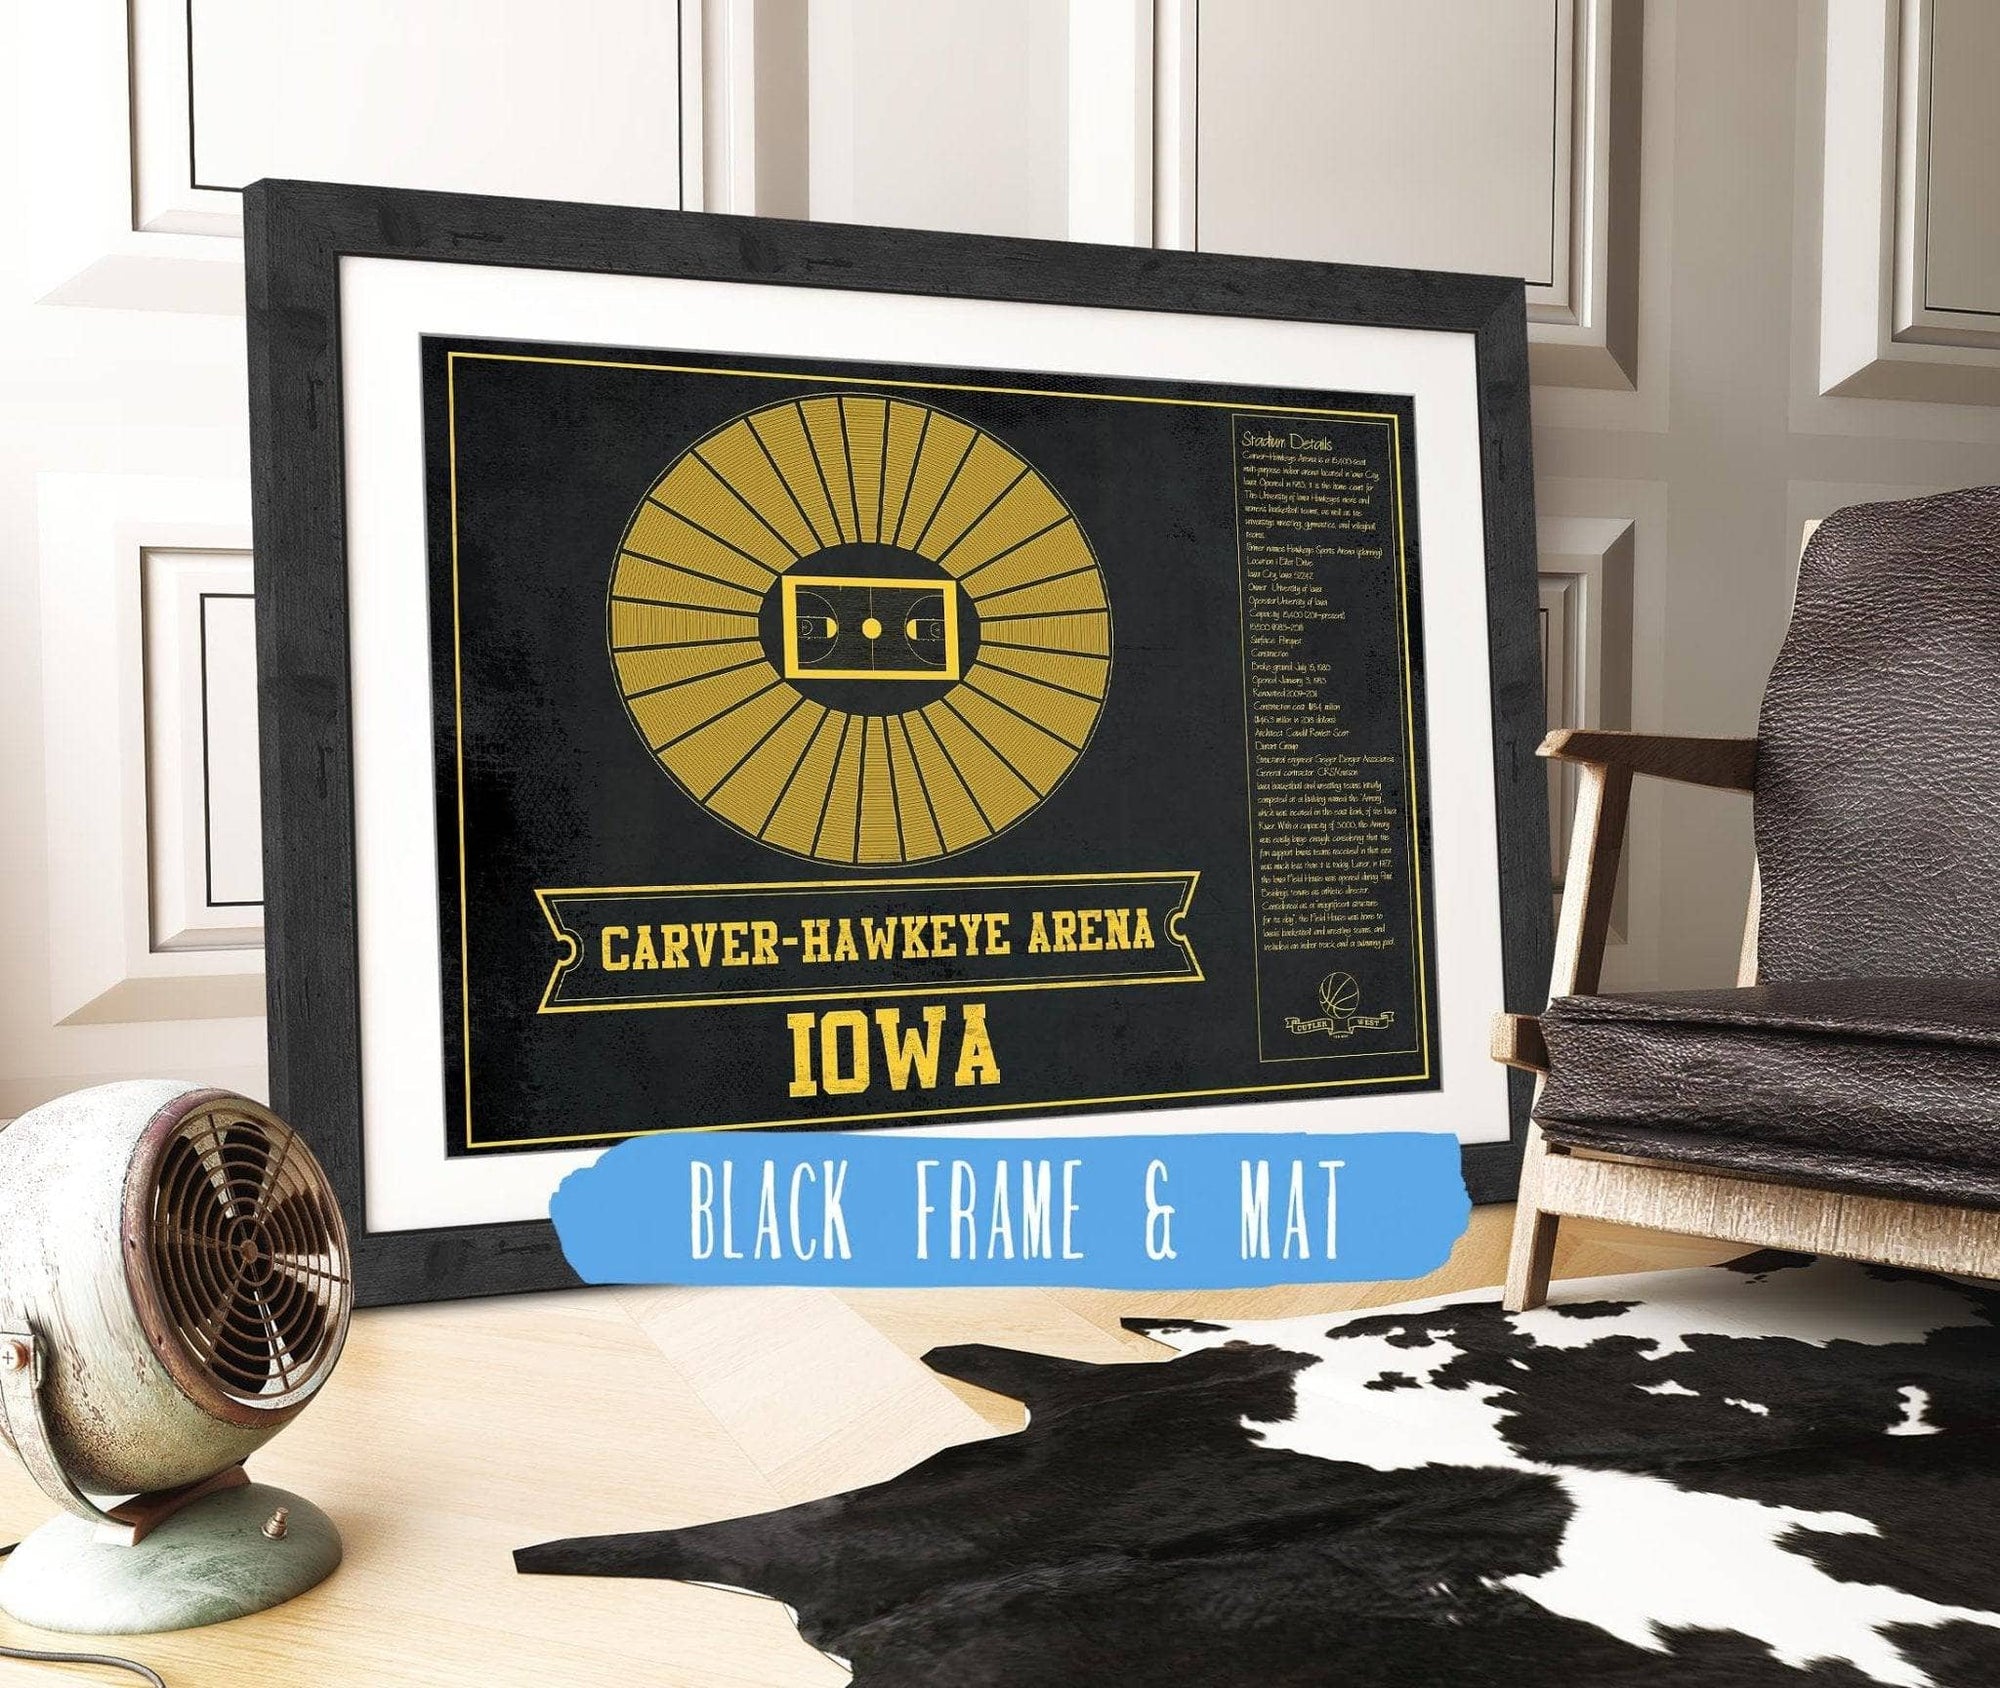 Cutler West Basketball Collection 14" x 11" / Black Frame & Mat Carver–Hawkeye Arena Iowa Men's And Women's Basketball Team Vintage Print 933350234_83494